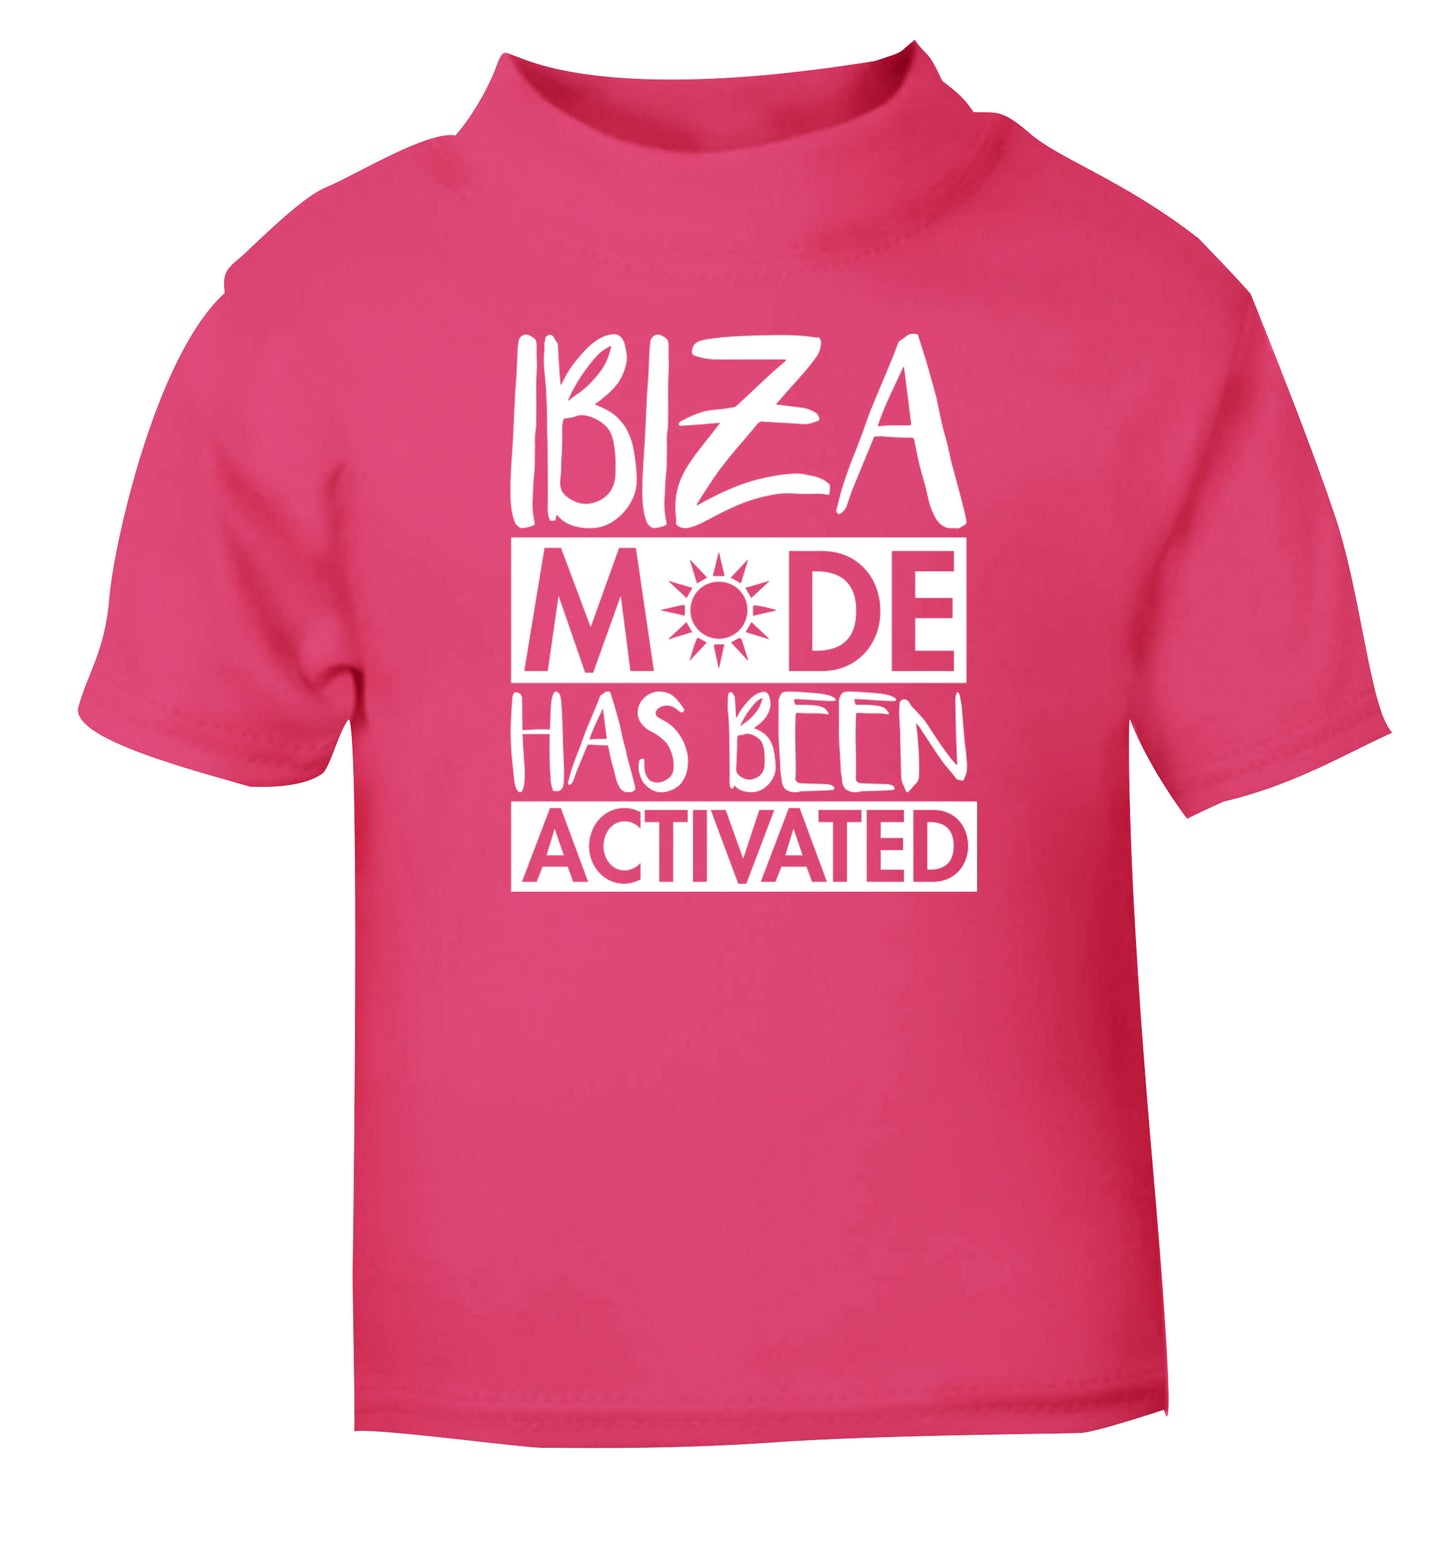 Ibiza mode has been activated pink Baby Toddler Tshirt 2 Years